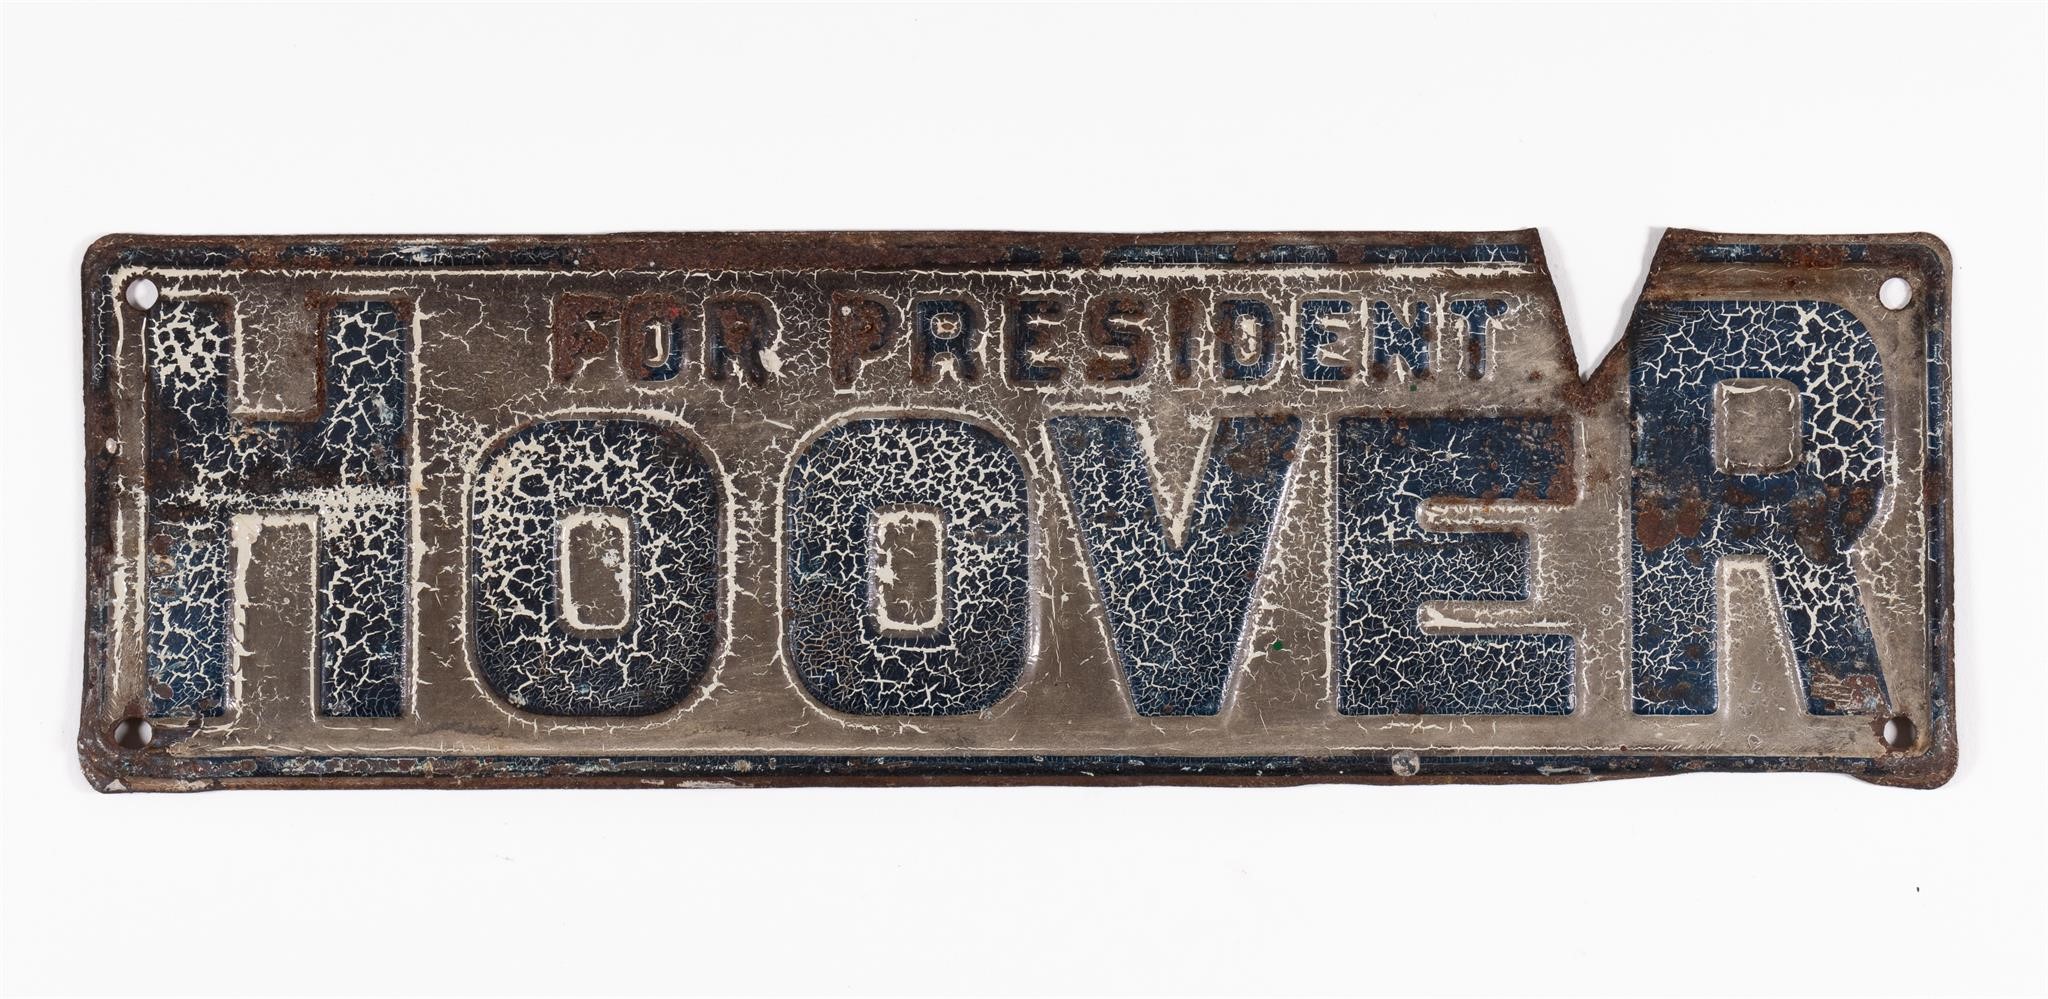 HOOVER CAMPAIGN LICENSE PLATE